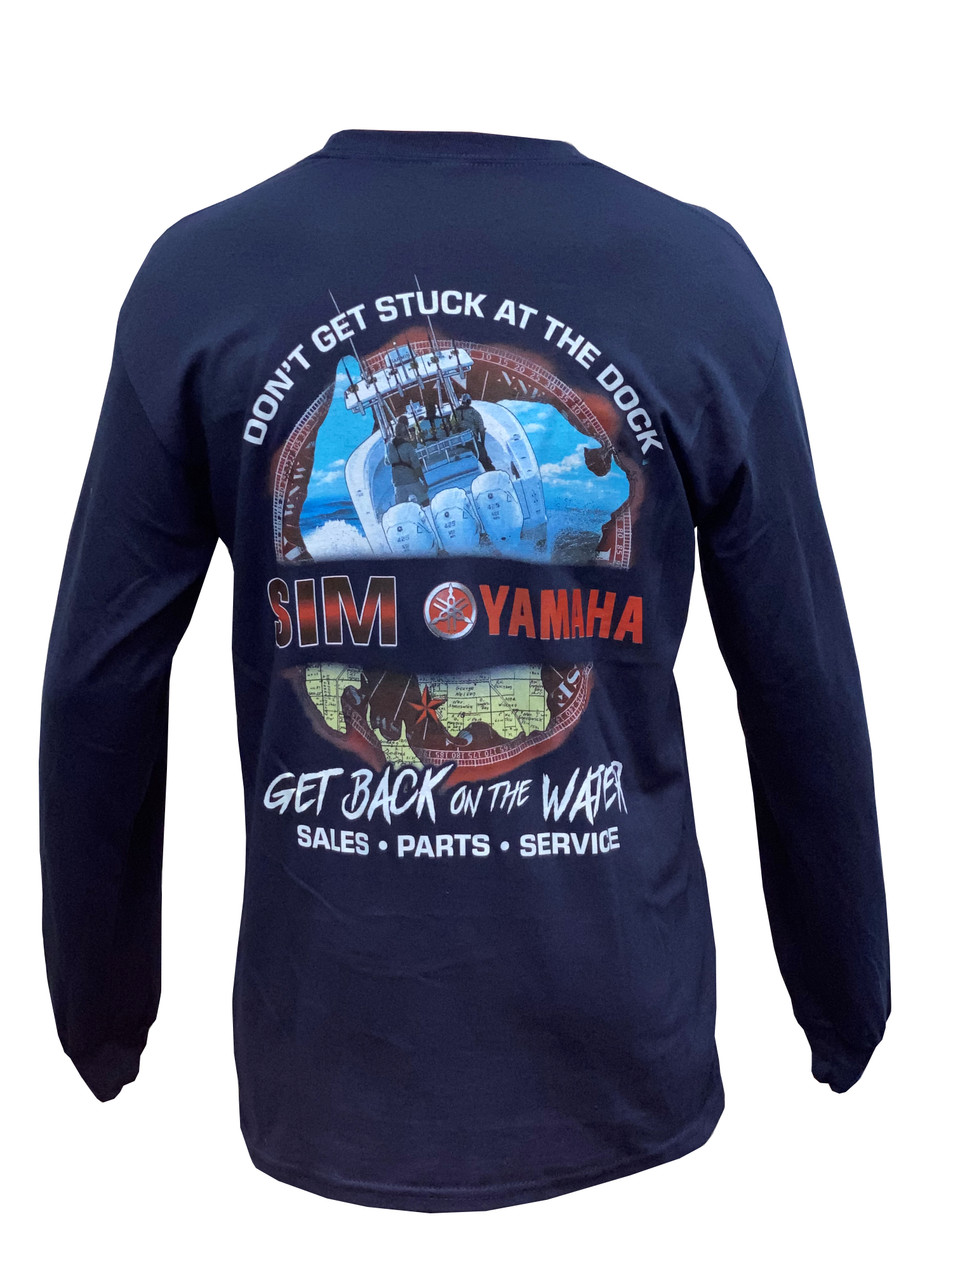 Funny Outboard Motor Fishing - Outboard - Long Sleeve T-Shirt